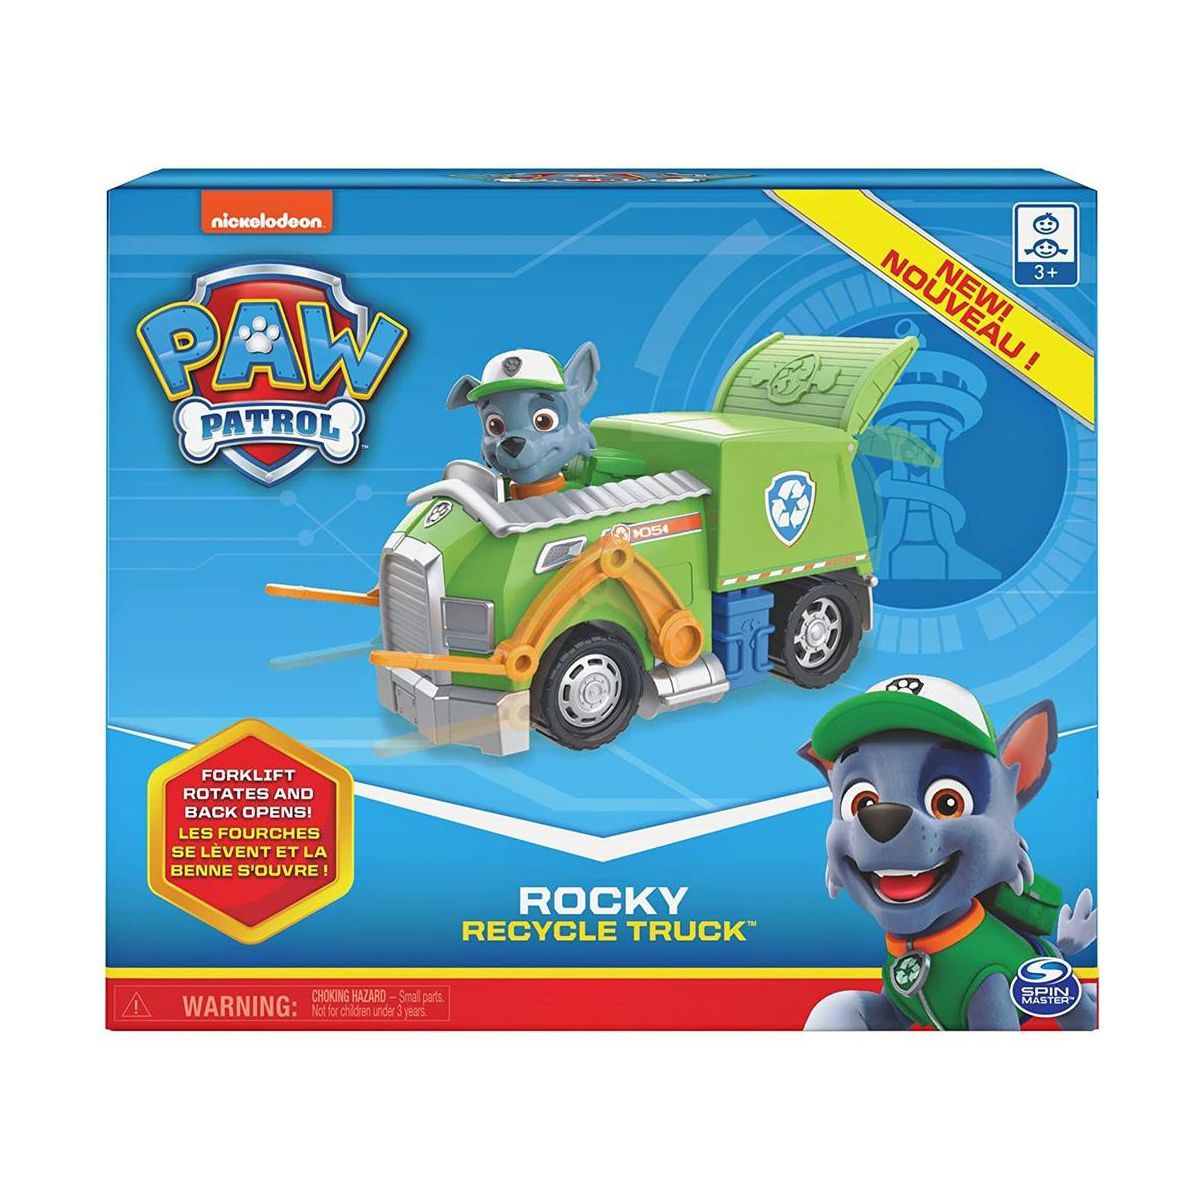 Paw Patrol, Rocky’s Recycle Truck Vehicle | Target